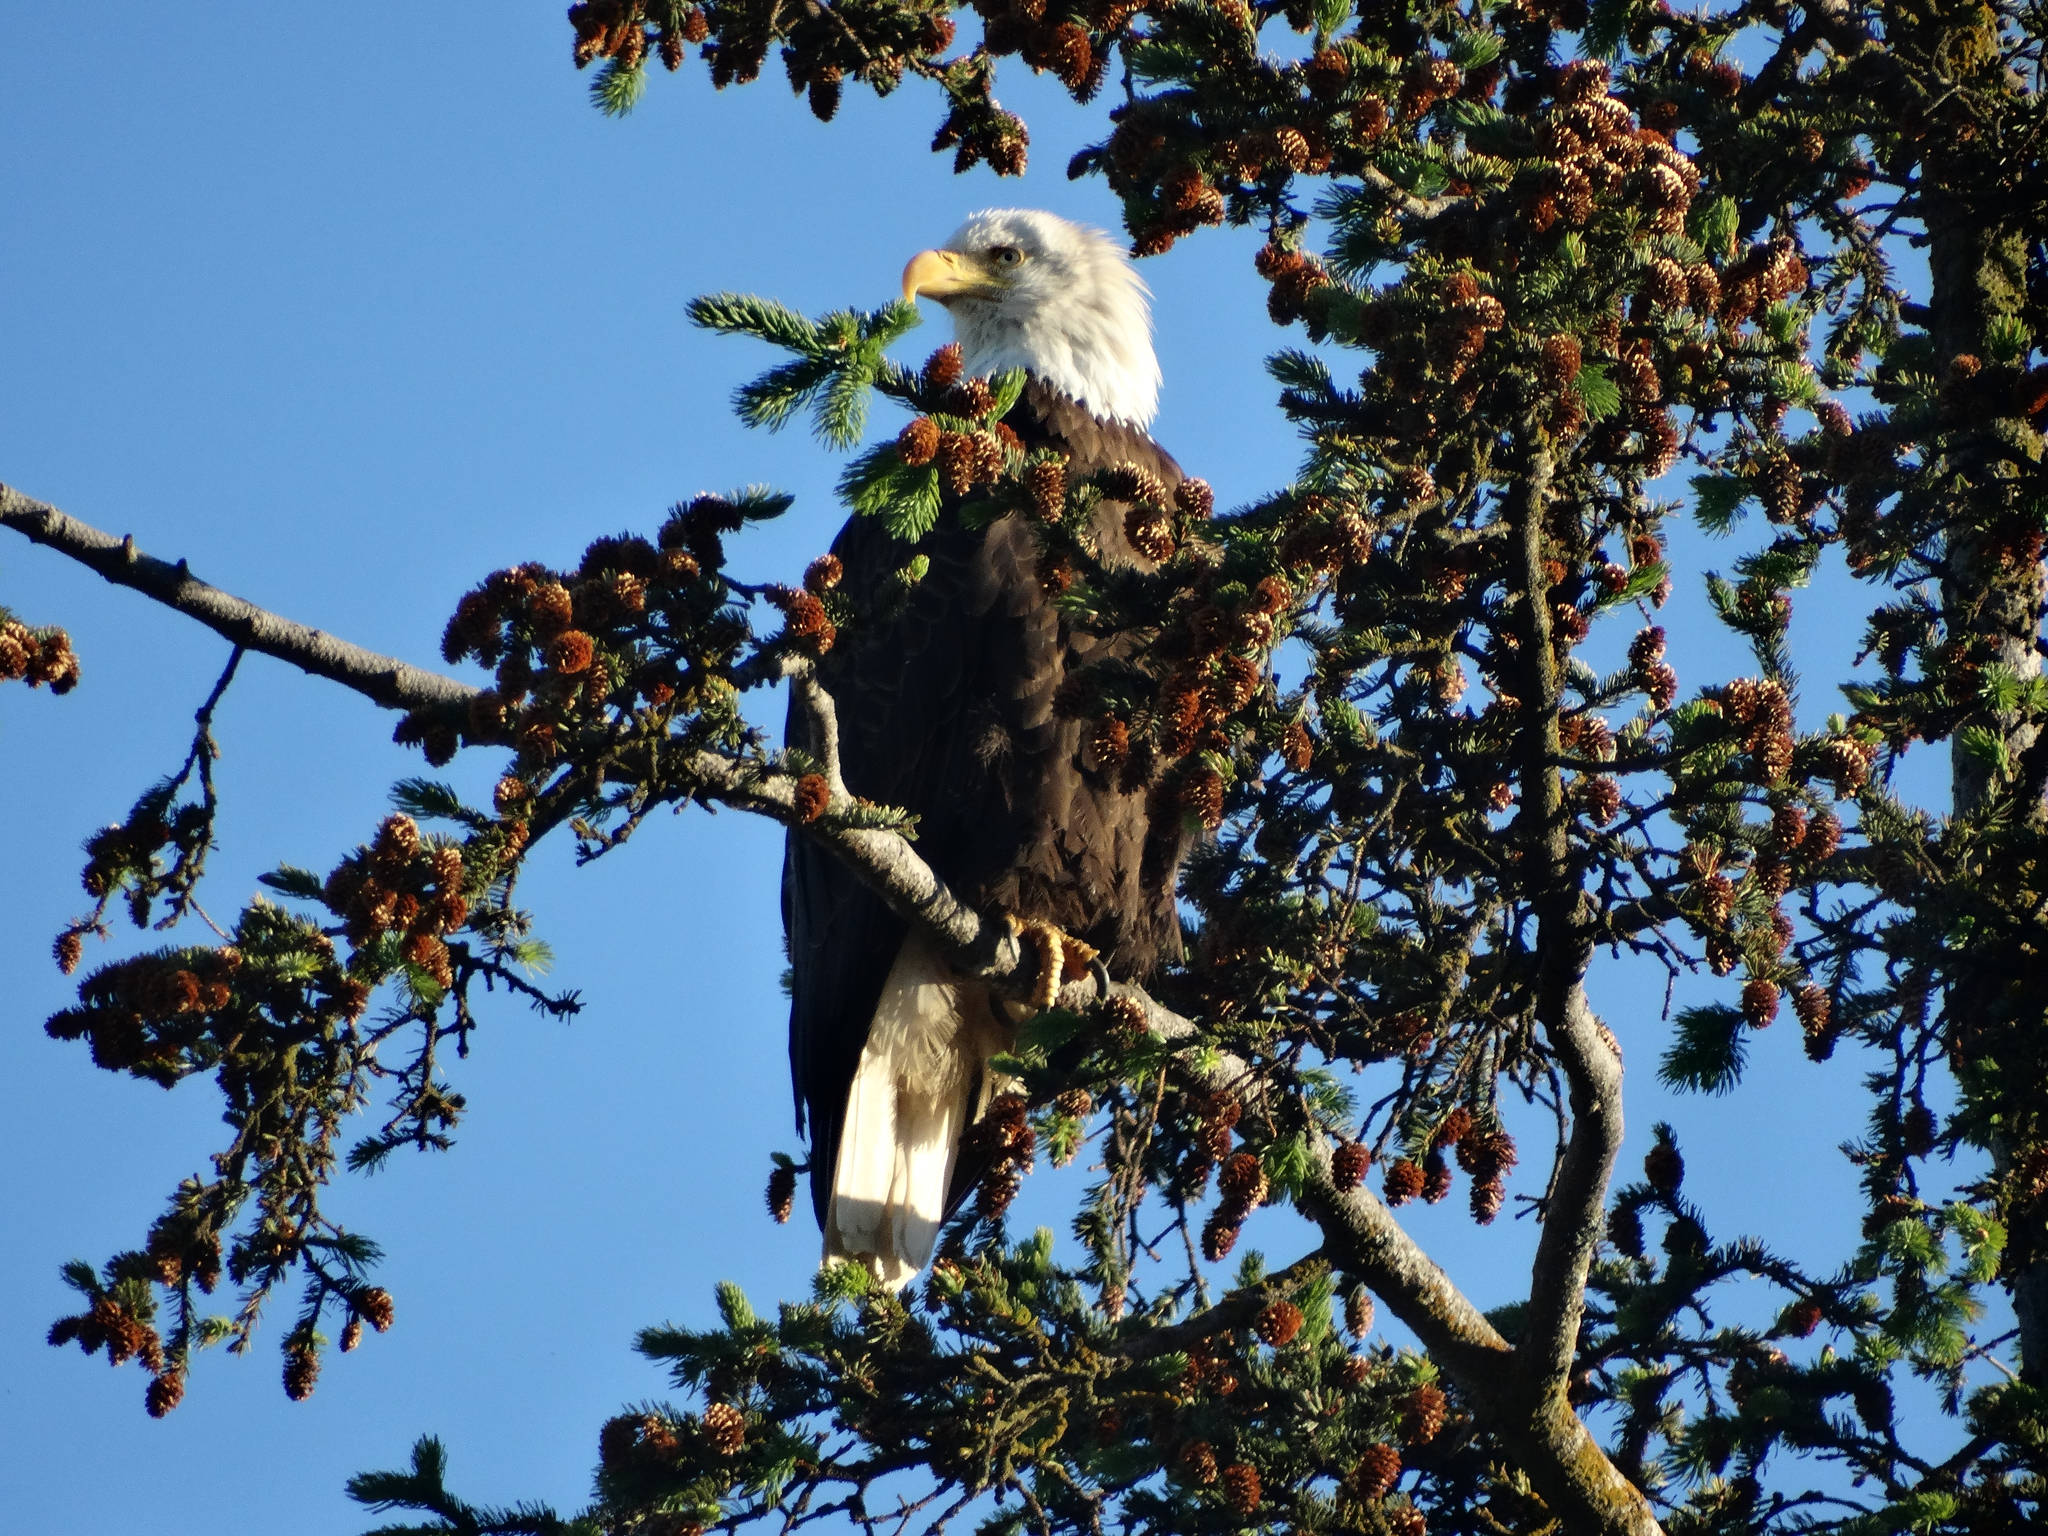 A bald eagle sits near its nest by the Homer motorhome dump on June 24, 2017, across the Sterling Highway from the Homer Post Office. Since 2010, a pair of bald eagles has nested in the area near Beluga Slough south of the Lake Street and Sterling Highway intersection. The first nest was destroyed when the tree fell down in a winter storm. In 2012 the eagles built a new nest across from the Homer Post Office by the motorhome dump station. In 2014 they built another nest in a new tree closer to the slough. In 2016 they built another nest, but in 2017 moved back to the post office location.